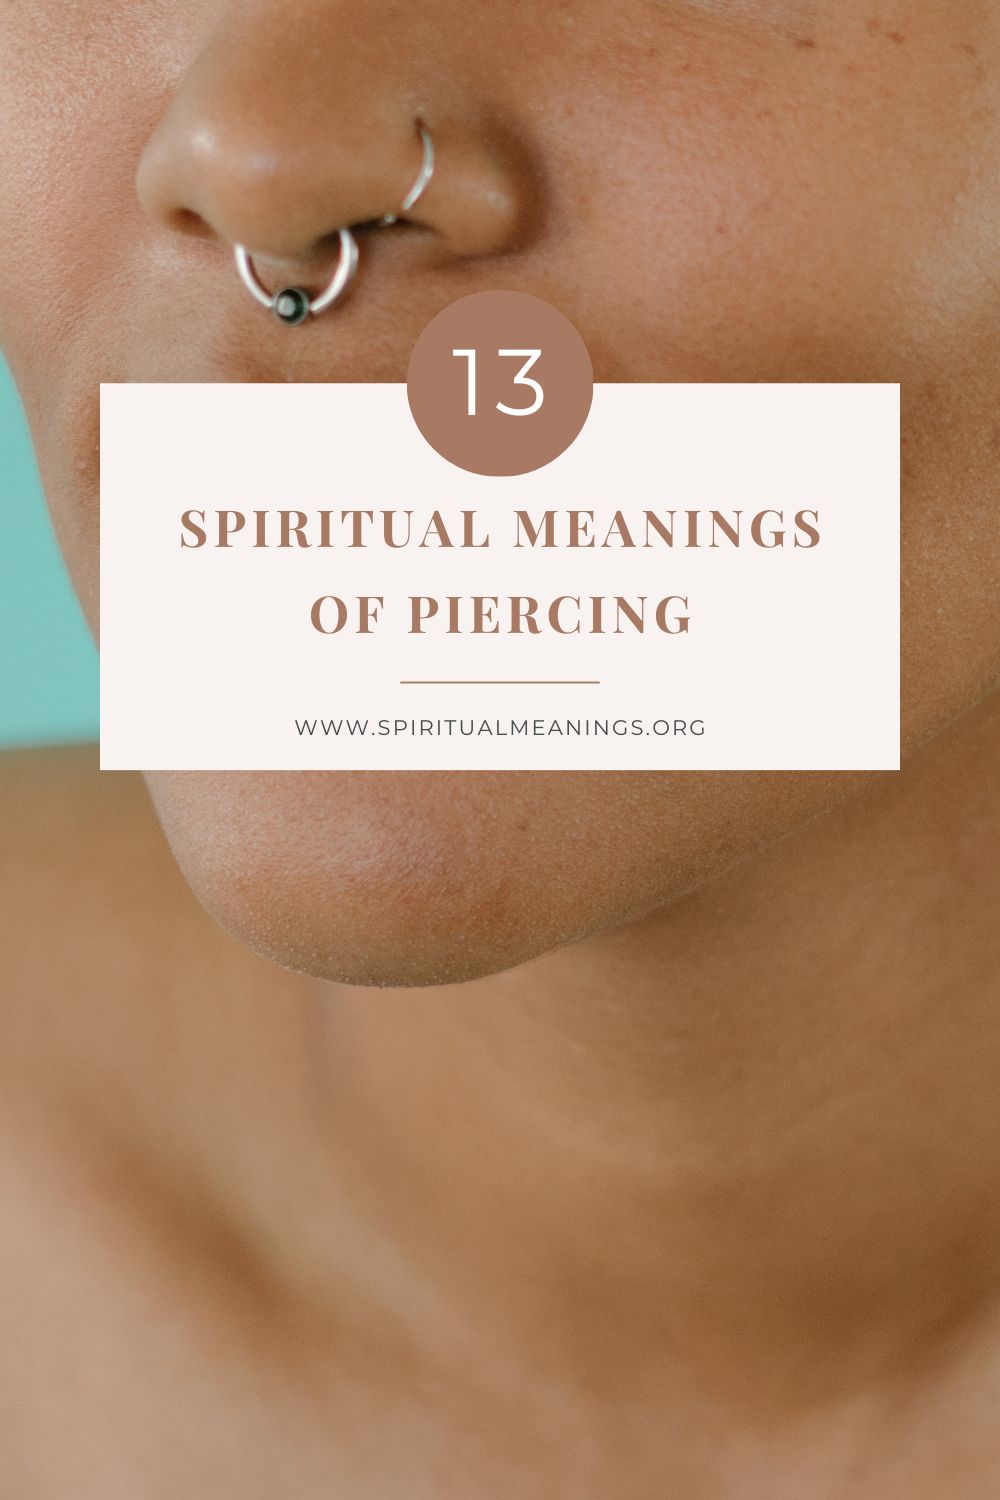 What Are The Spiritual Meanings Of Piercings